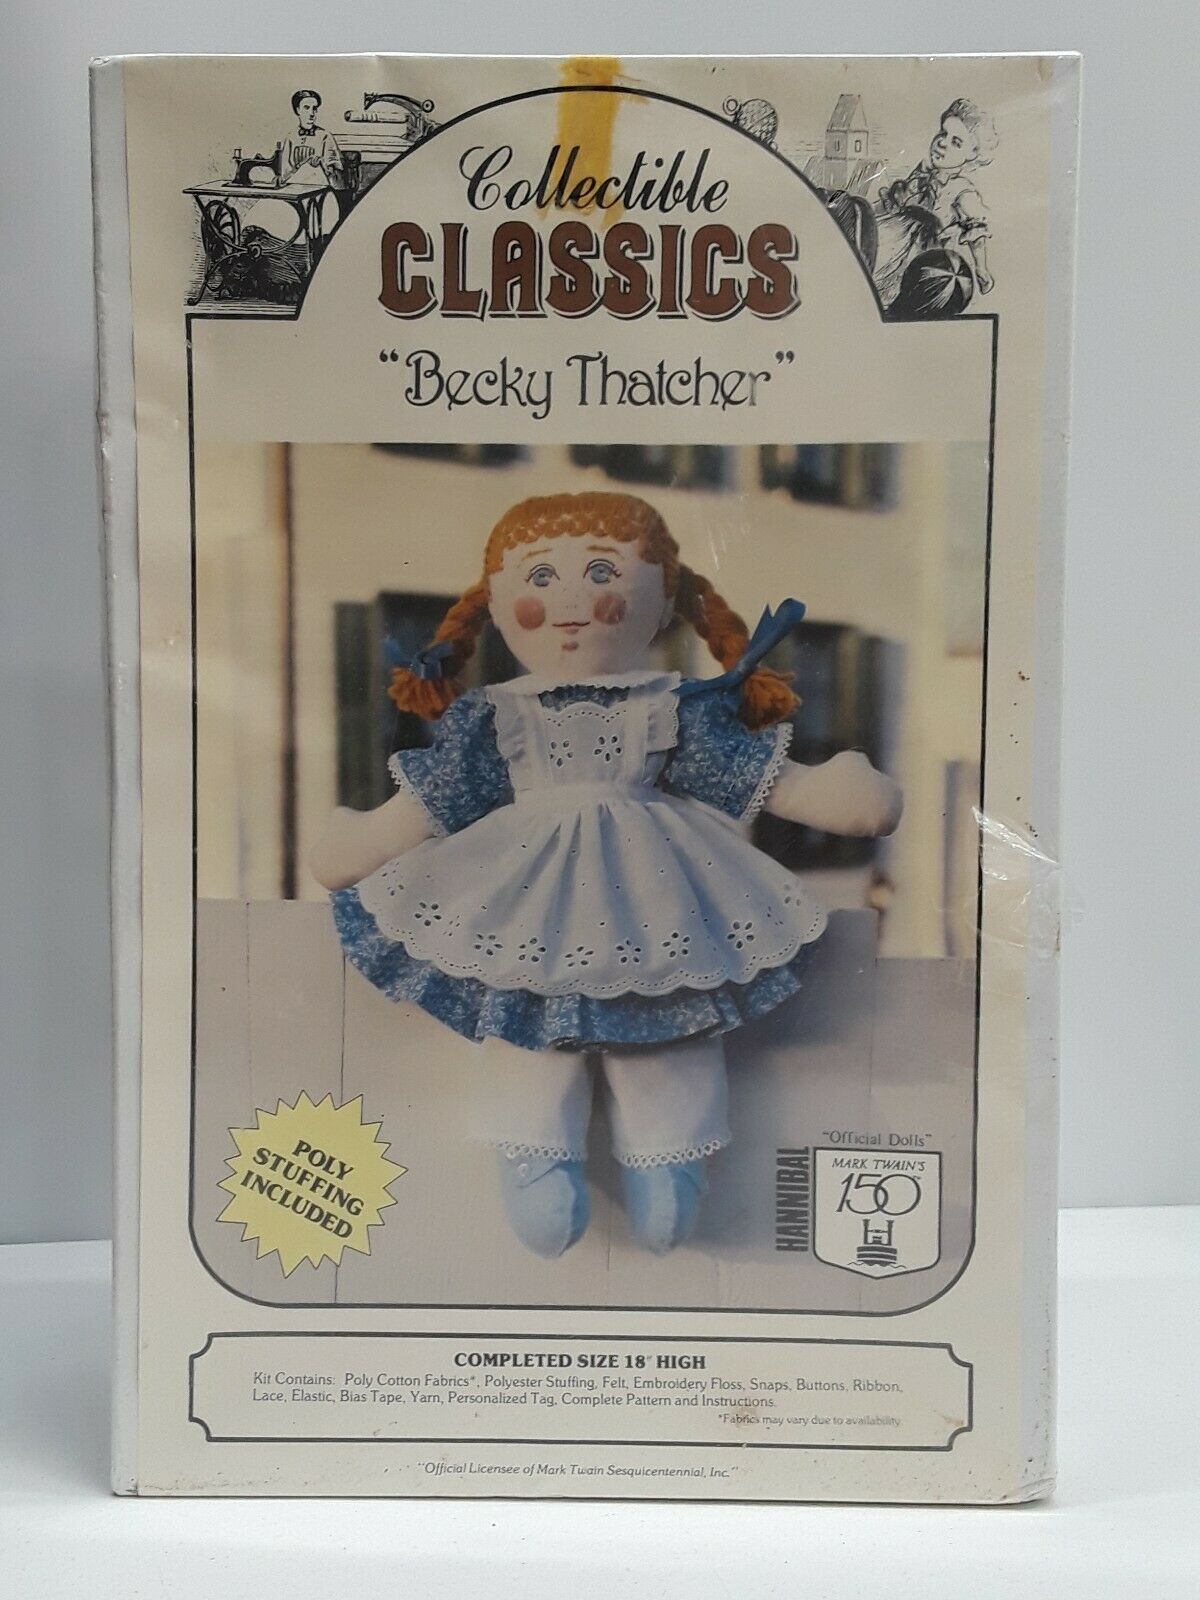 Becky Thatcher Craft Kit Collectible Classic Official Dolls Mark Twain's 150 18"